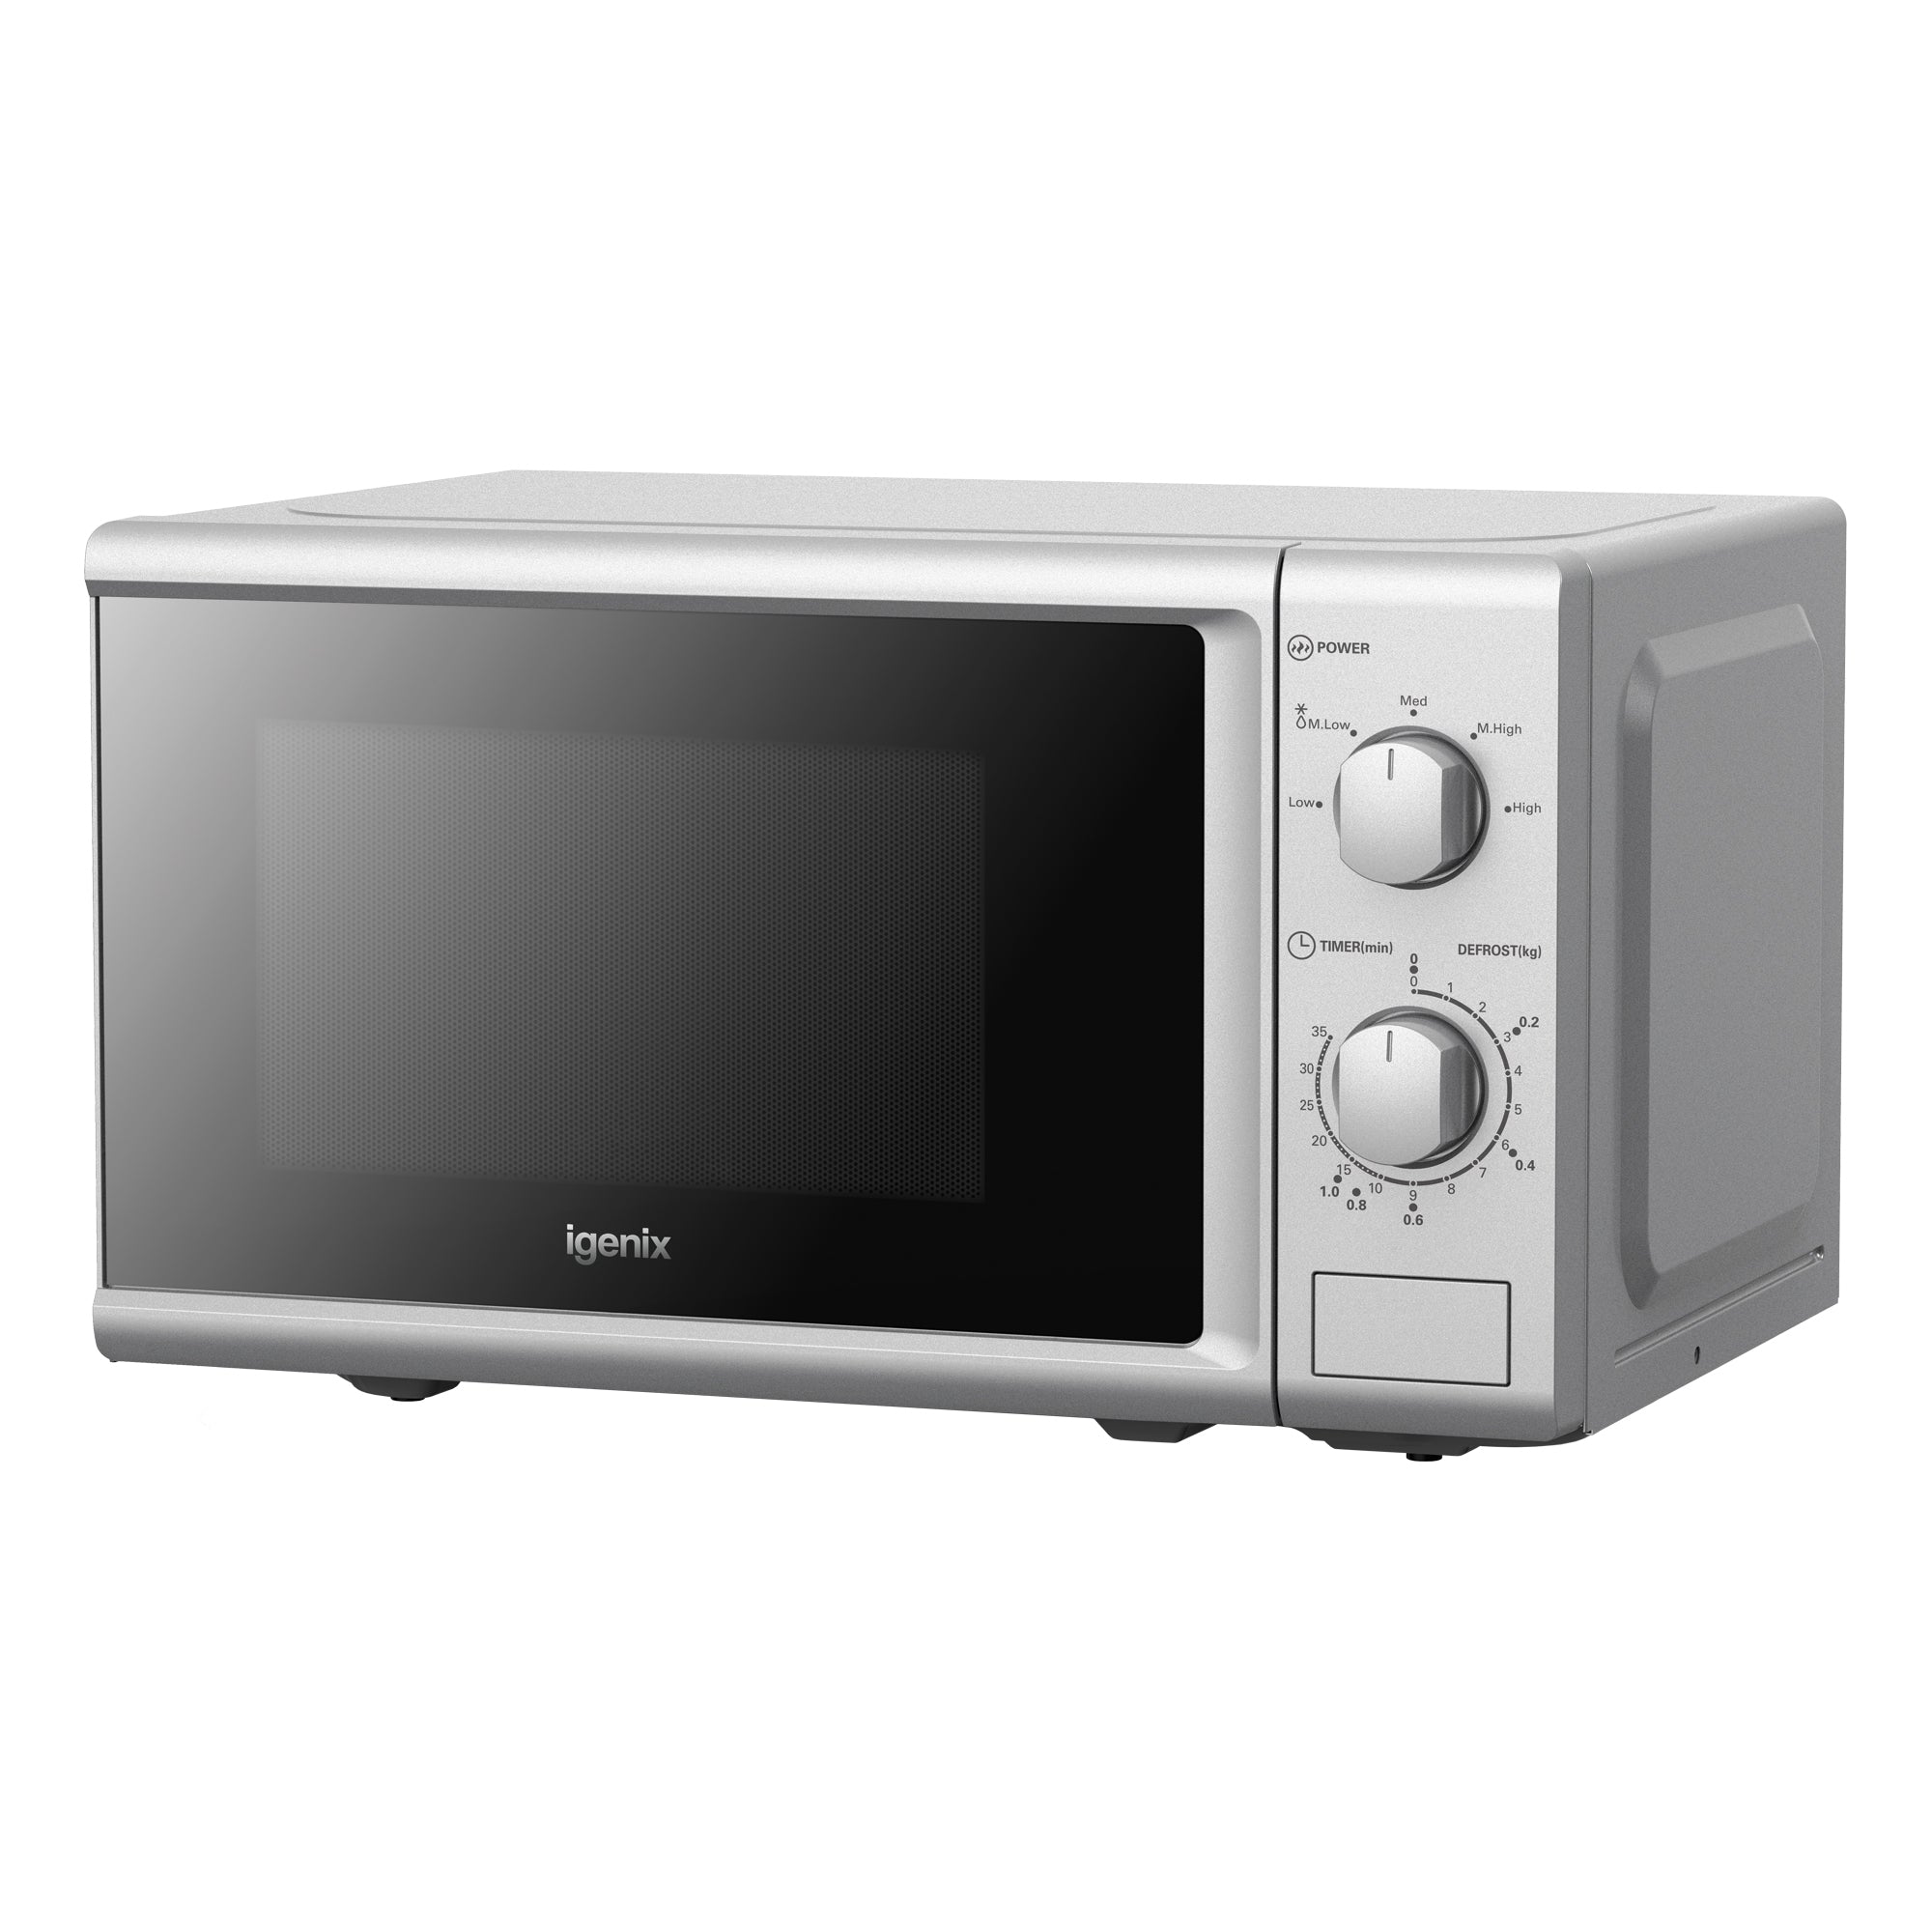 Manual Microwave, 20 Litre, 5 Power Settings, 800W, Silver